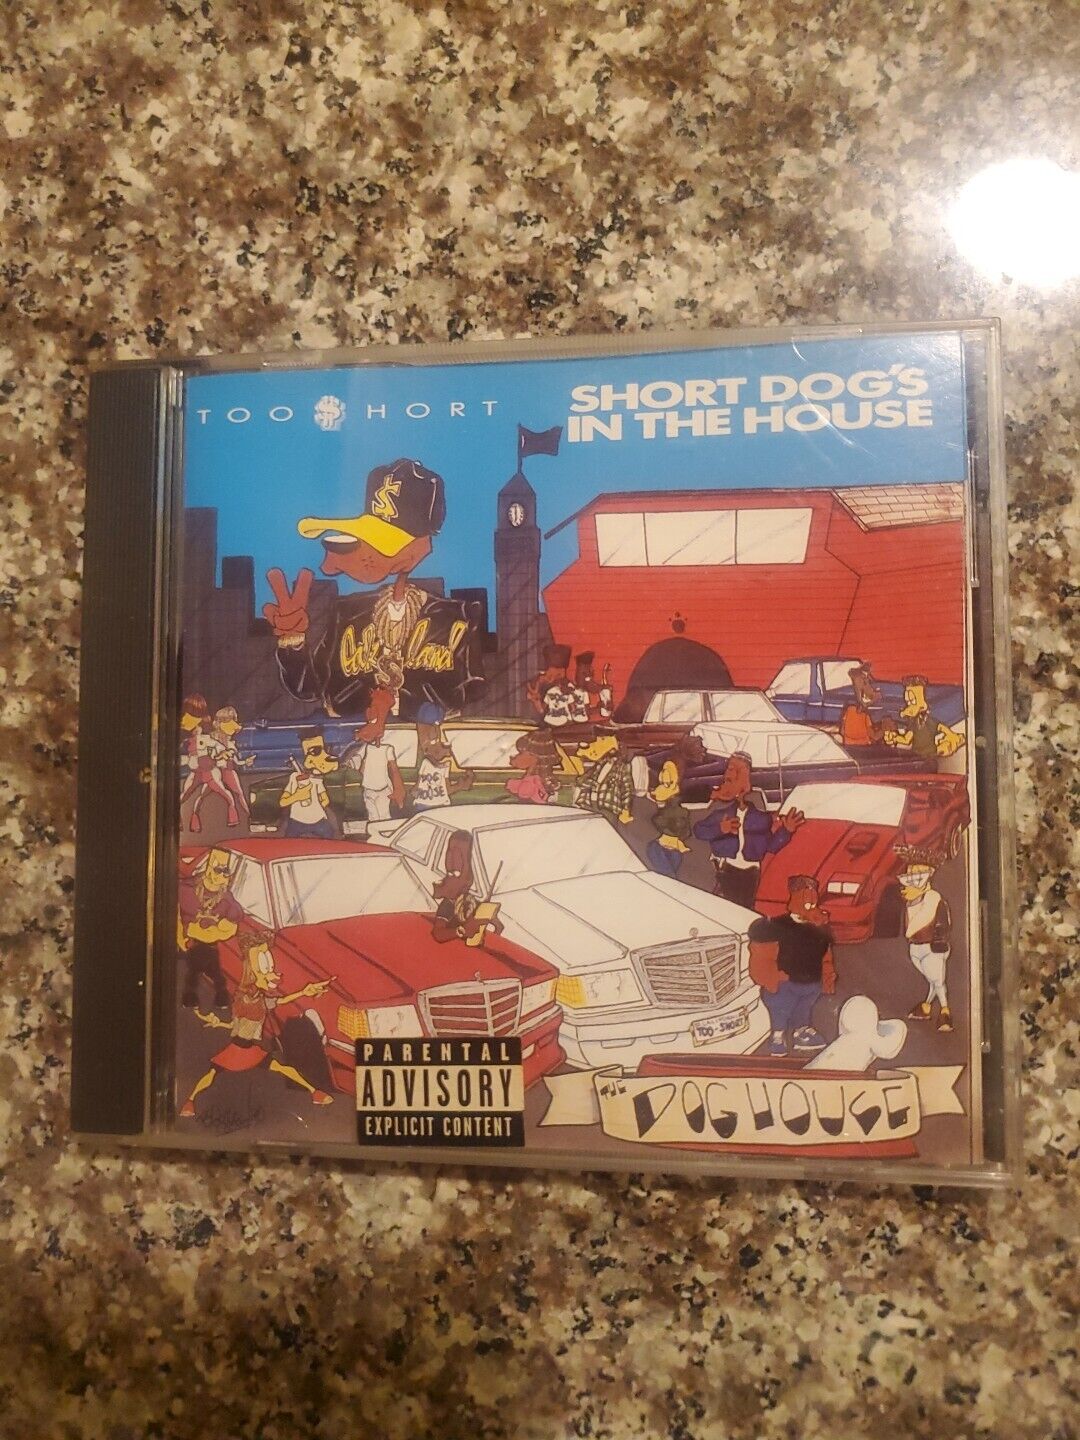 Short Dog's in the House by Too $hort (CD, 1990) Too Short